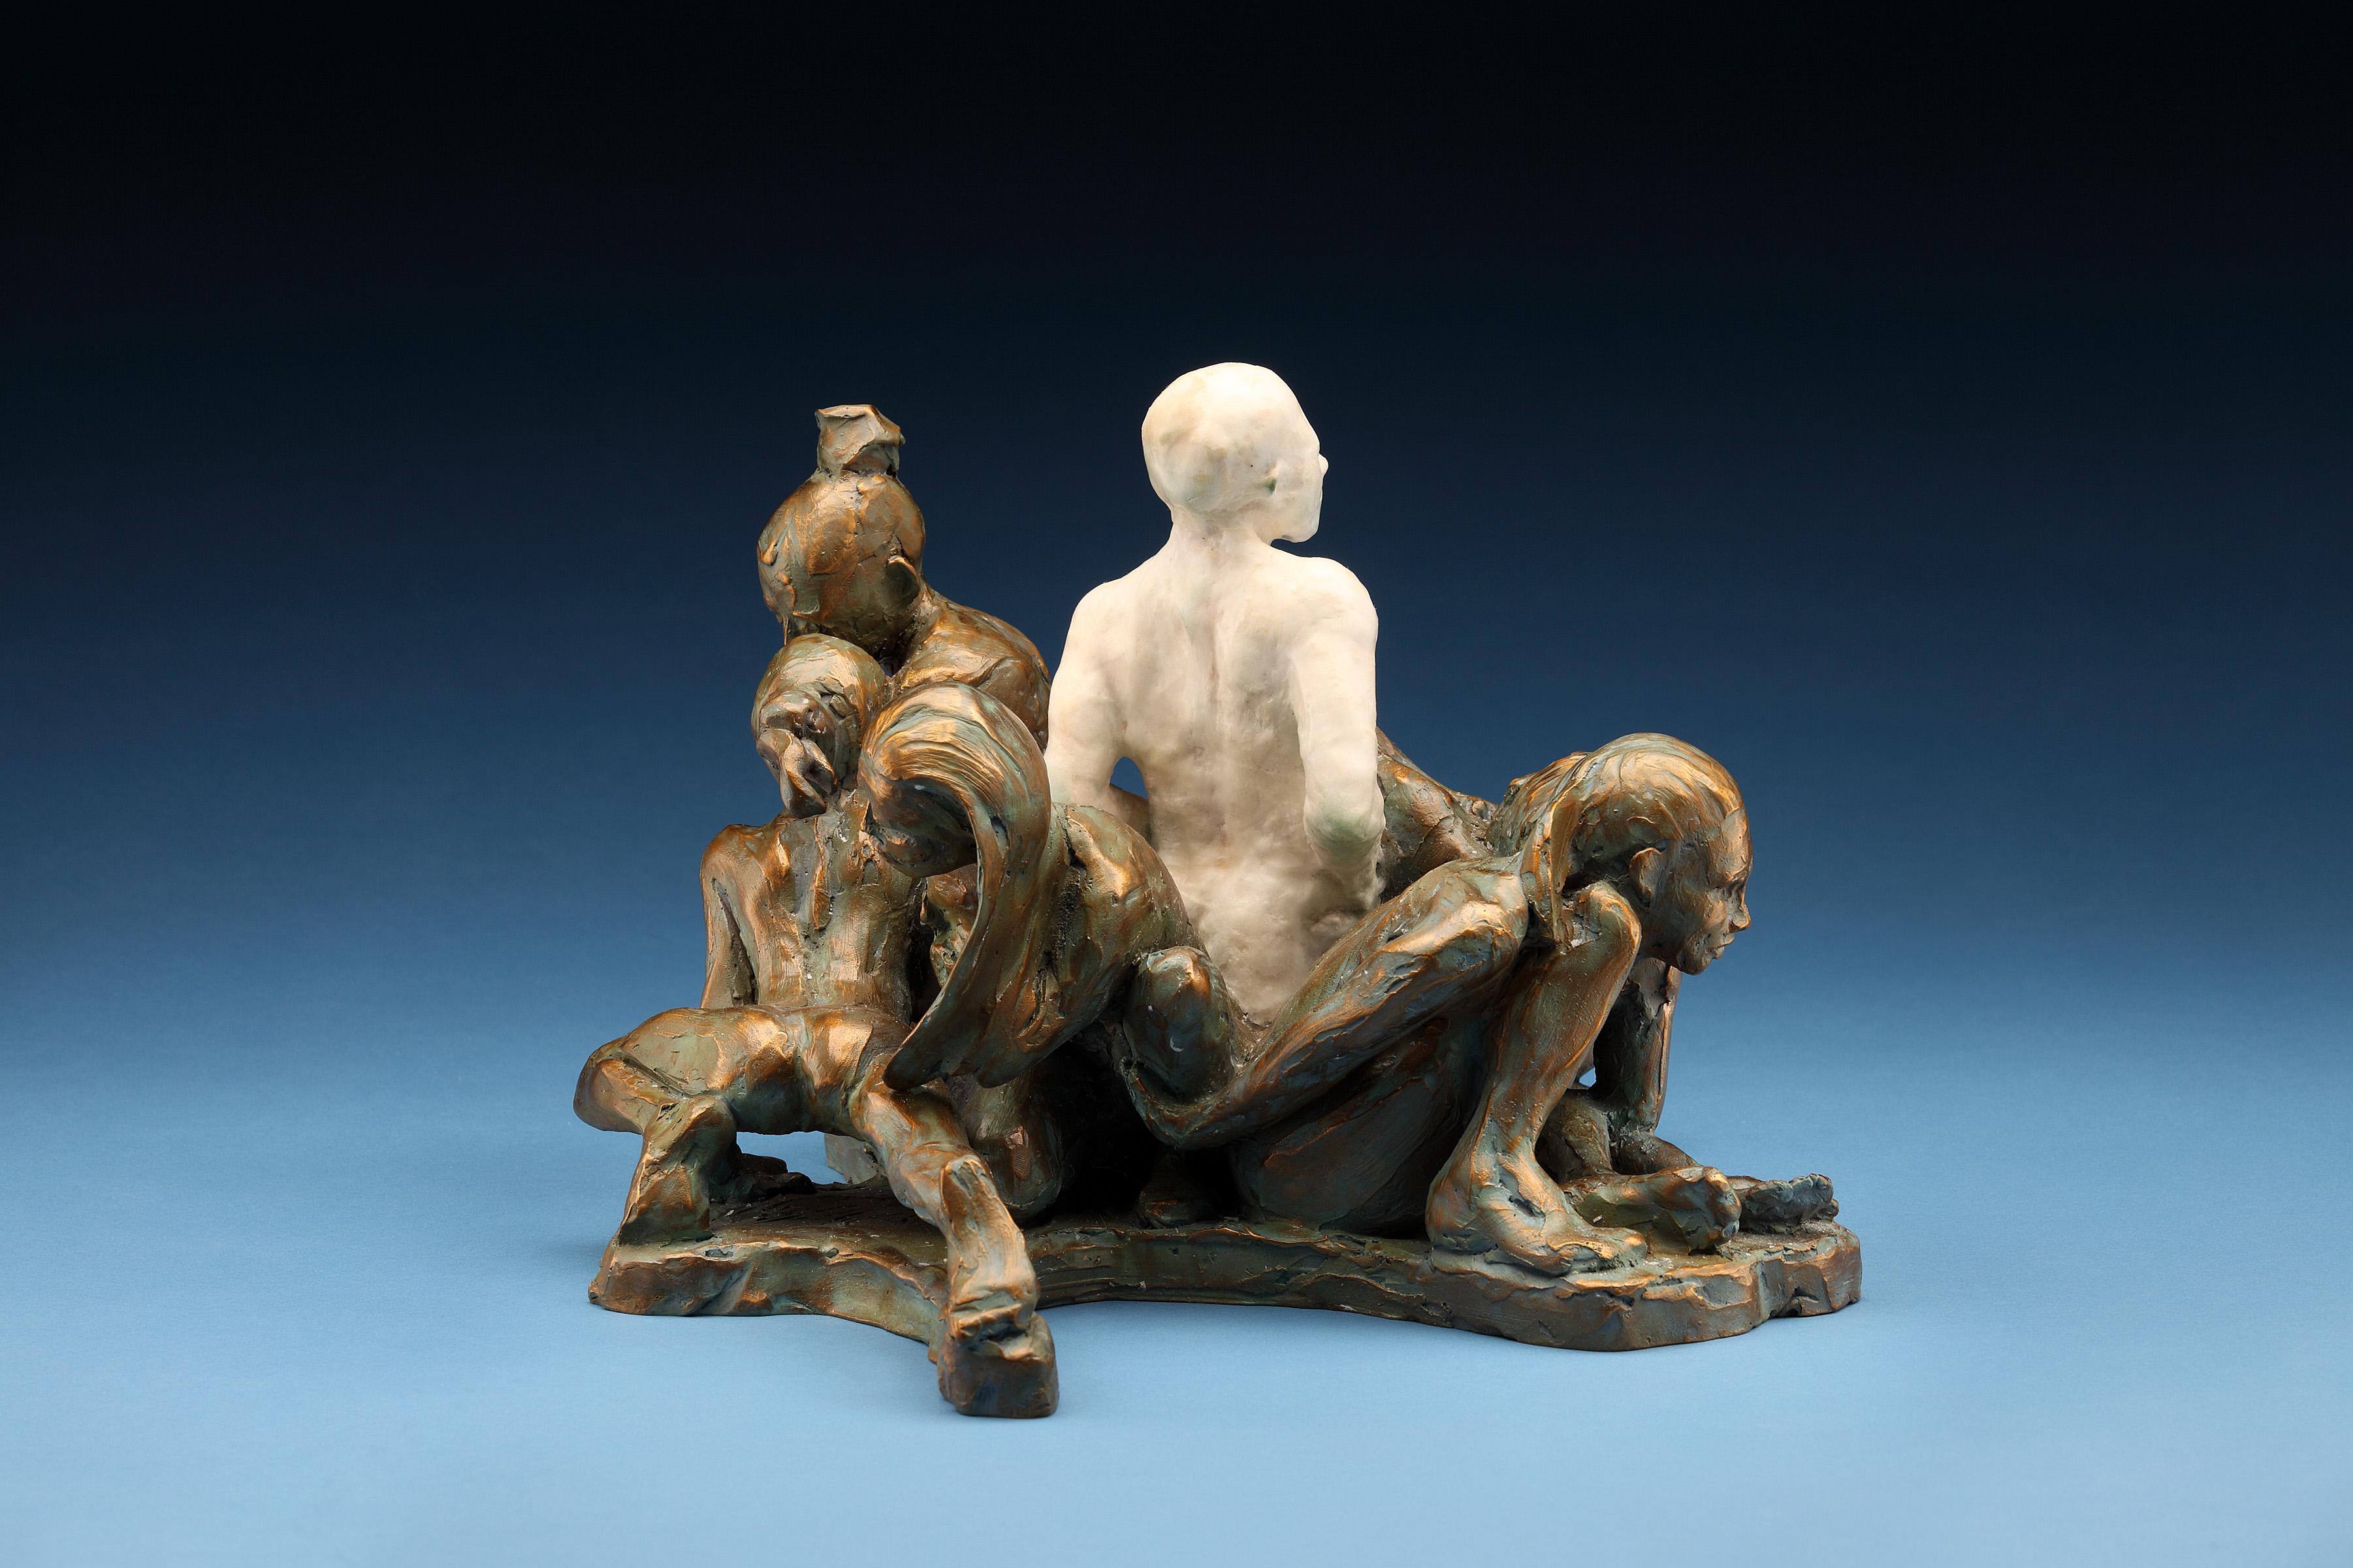 Looking For You by Denny Haskew
Figurative Bronze/Paraffin Wax
11x14x14